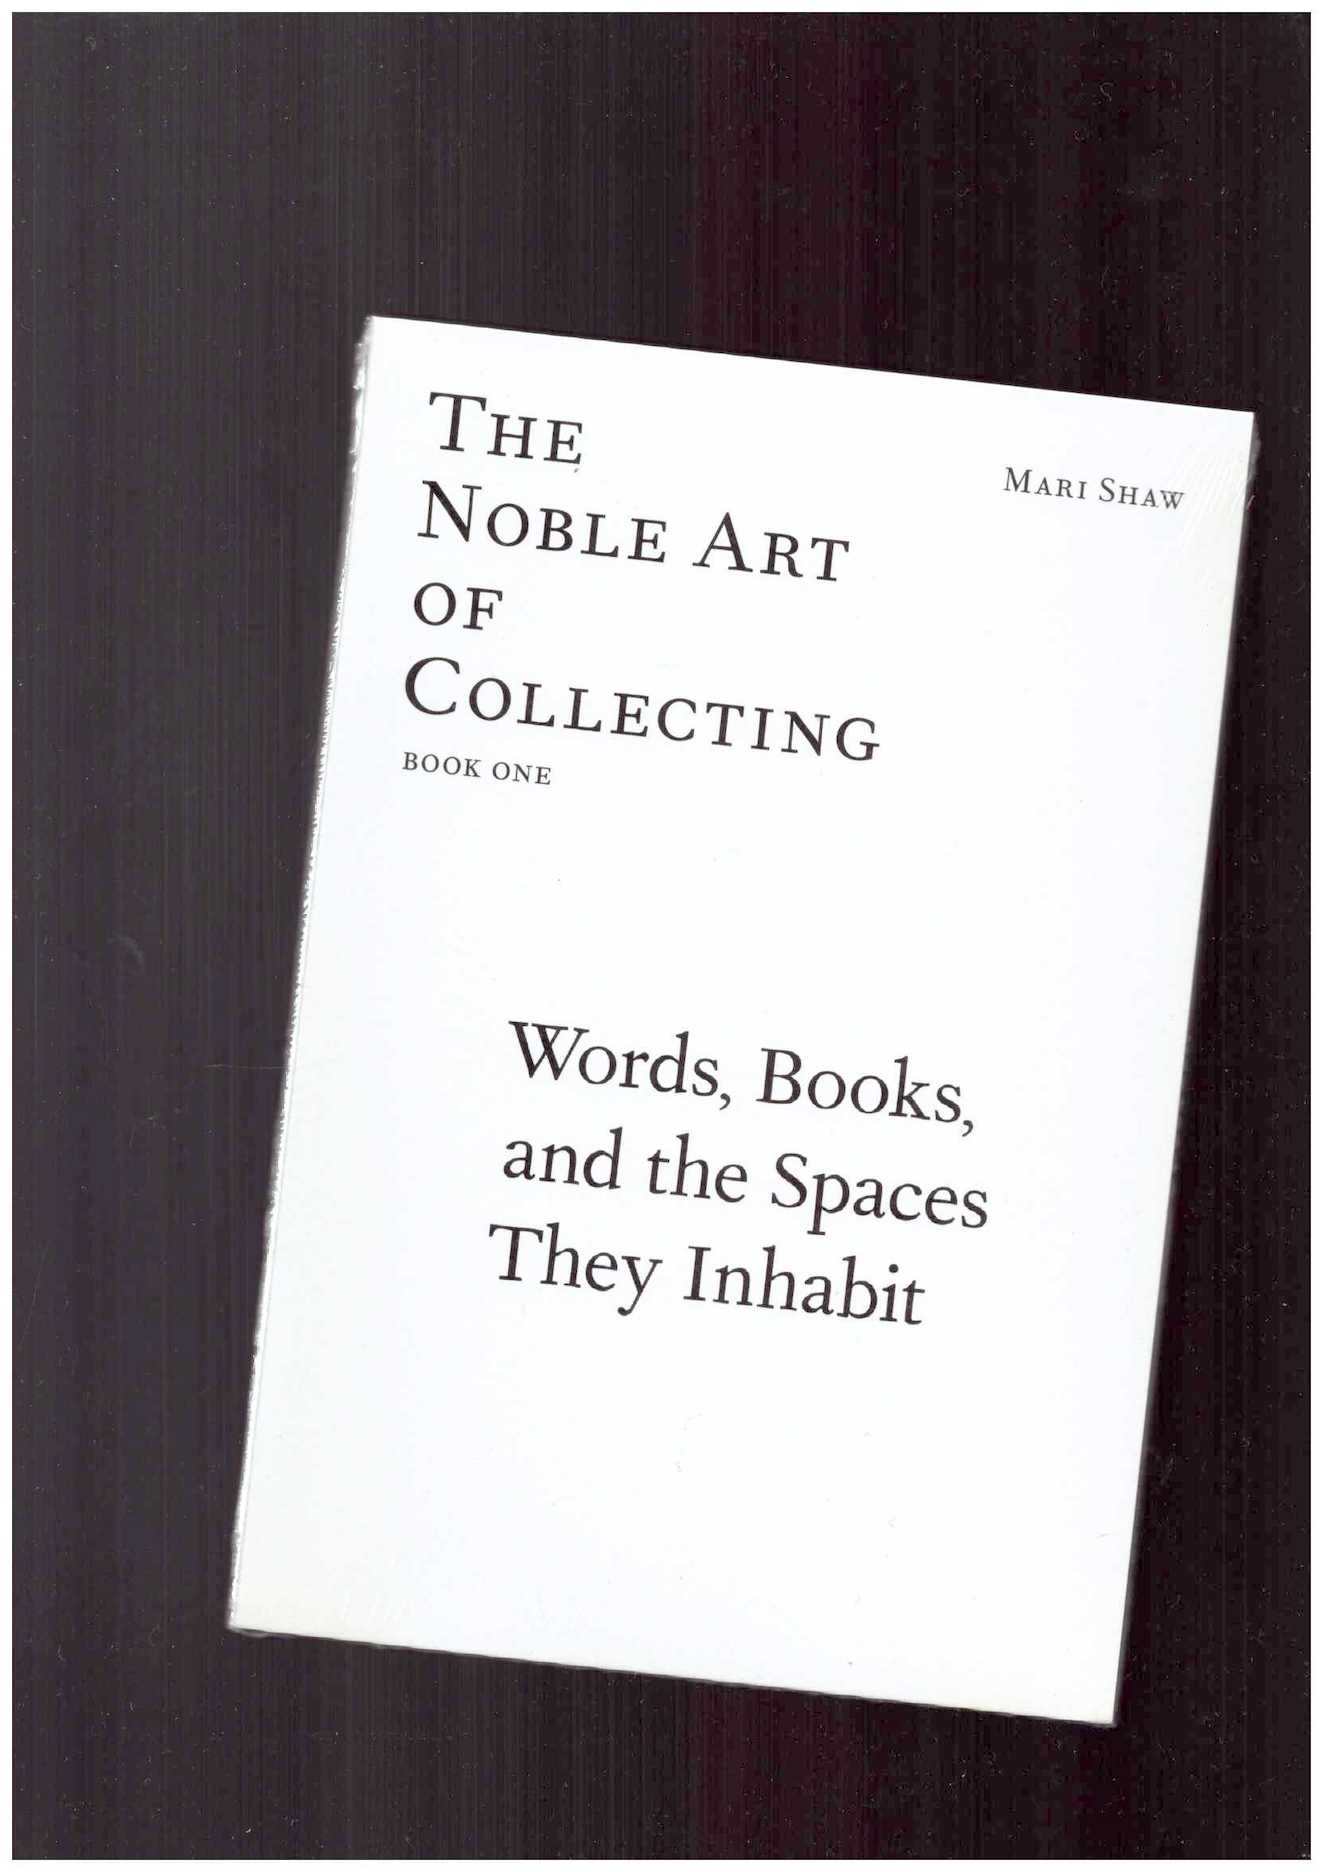 SHAW, Mari - The Noble Art of Collecting #01 – Words, Books, and the Spaces They Inhabit